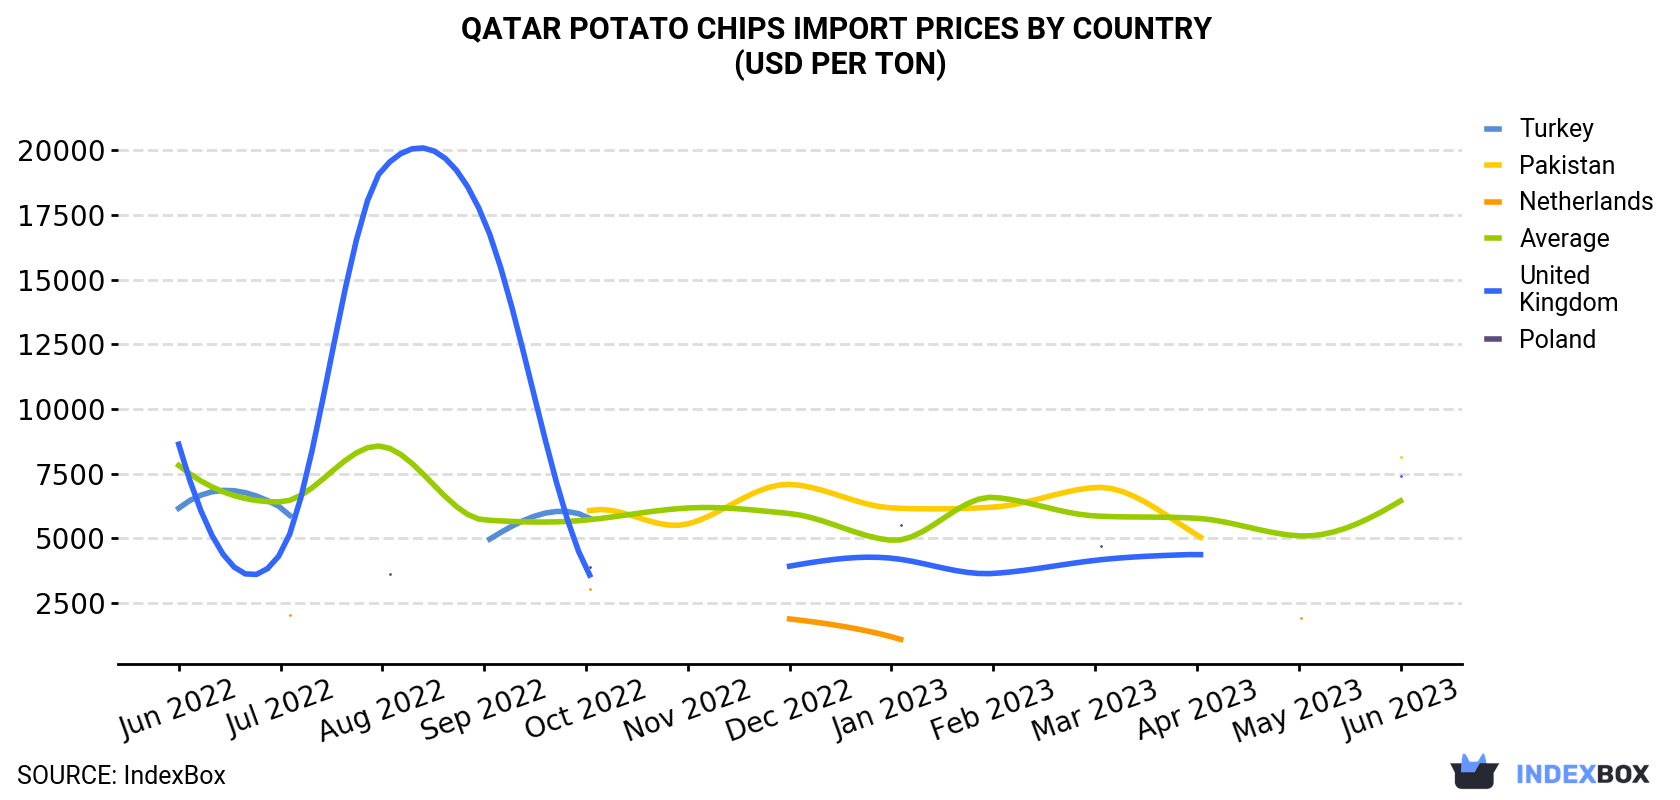 Qatar Potato Chips Import Prices By Country (USD Per Ton)